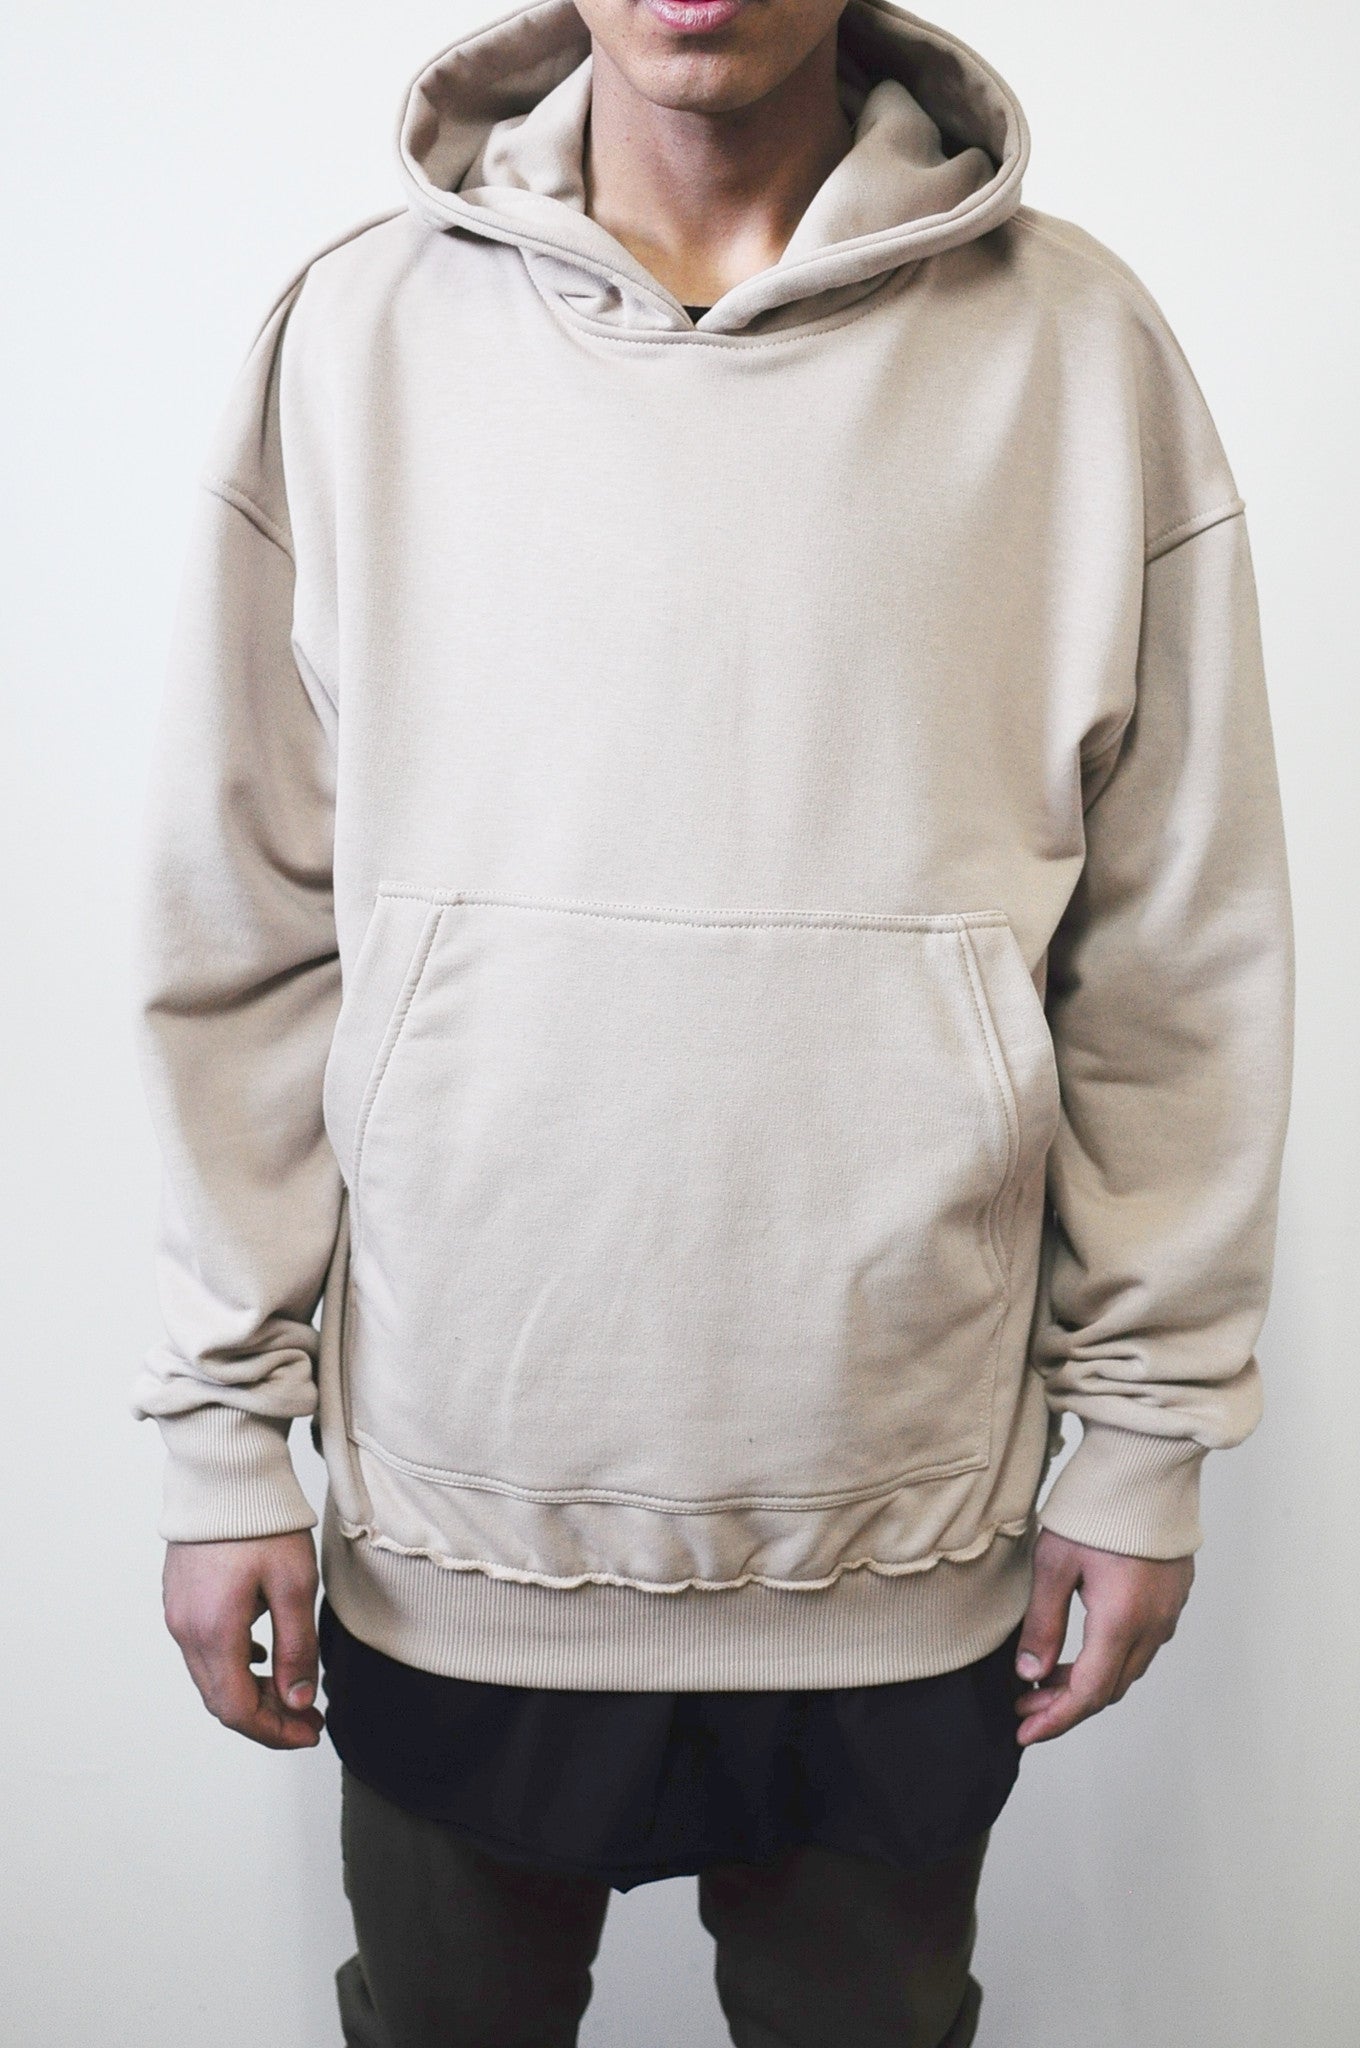 80 's Pullover Hoodie / Oversized Fit / Dropped Shoulder / Rear Neck Badge / Raw Edge Waistband